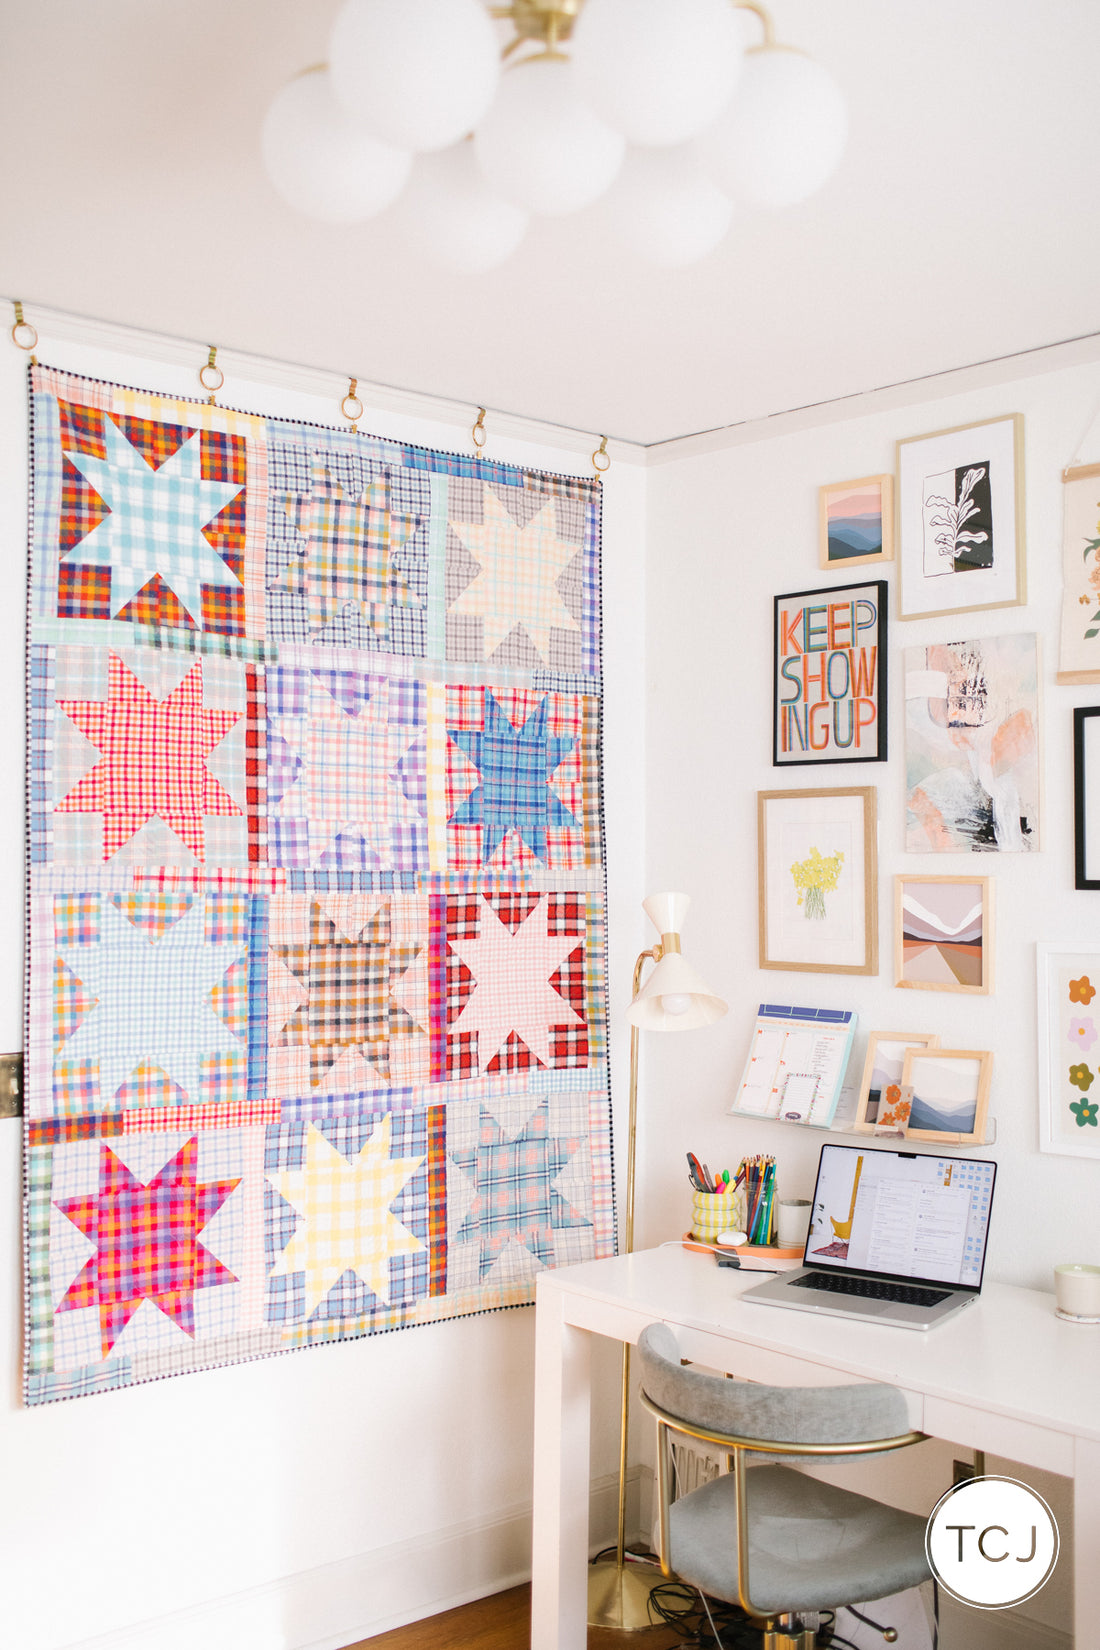 Inside Out Star Quilt - the Scrappy Flannel one